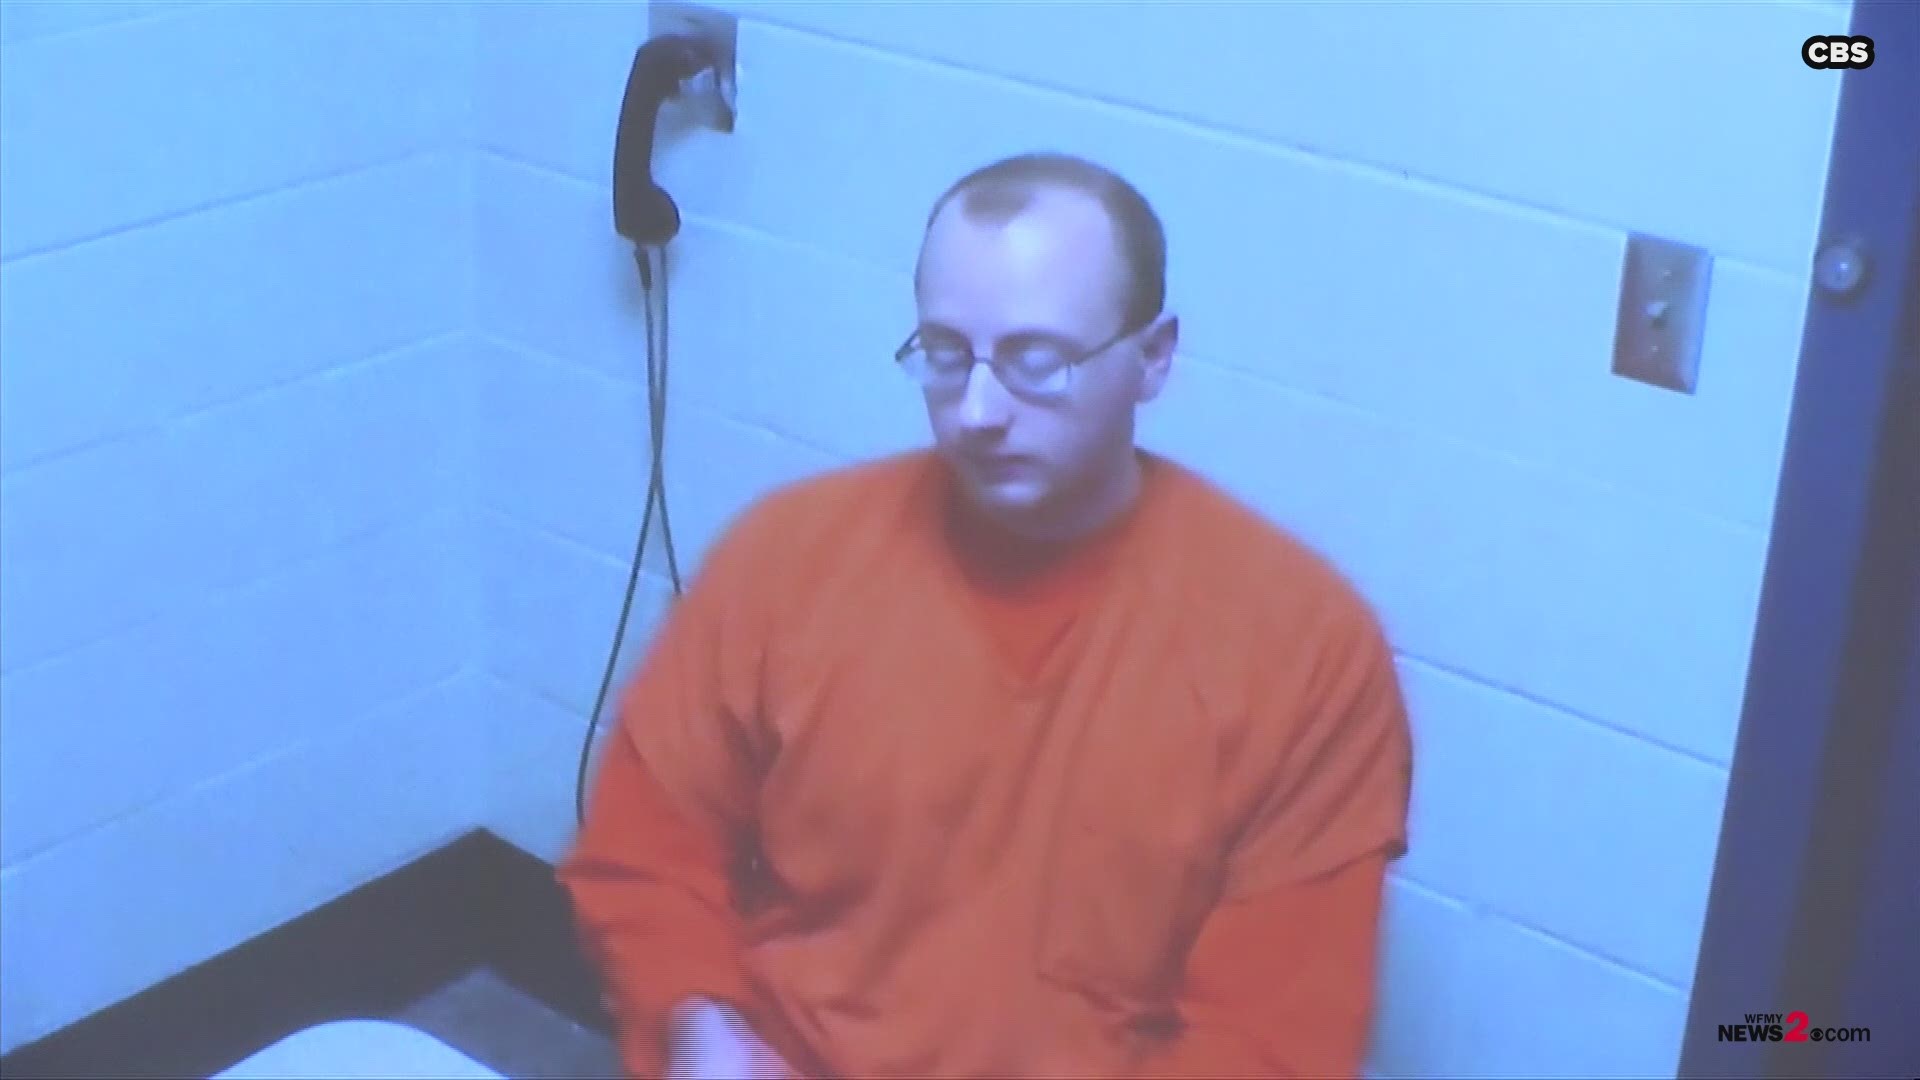 James Thomas Patterson is charged with kidnapping 13-year-old, Jayme Closs and murdering her parents. He was formally charged in court during his first appearance by video conference.